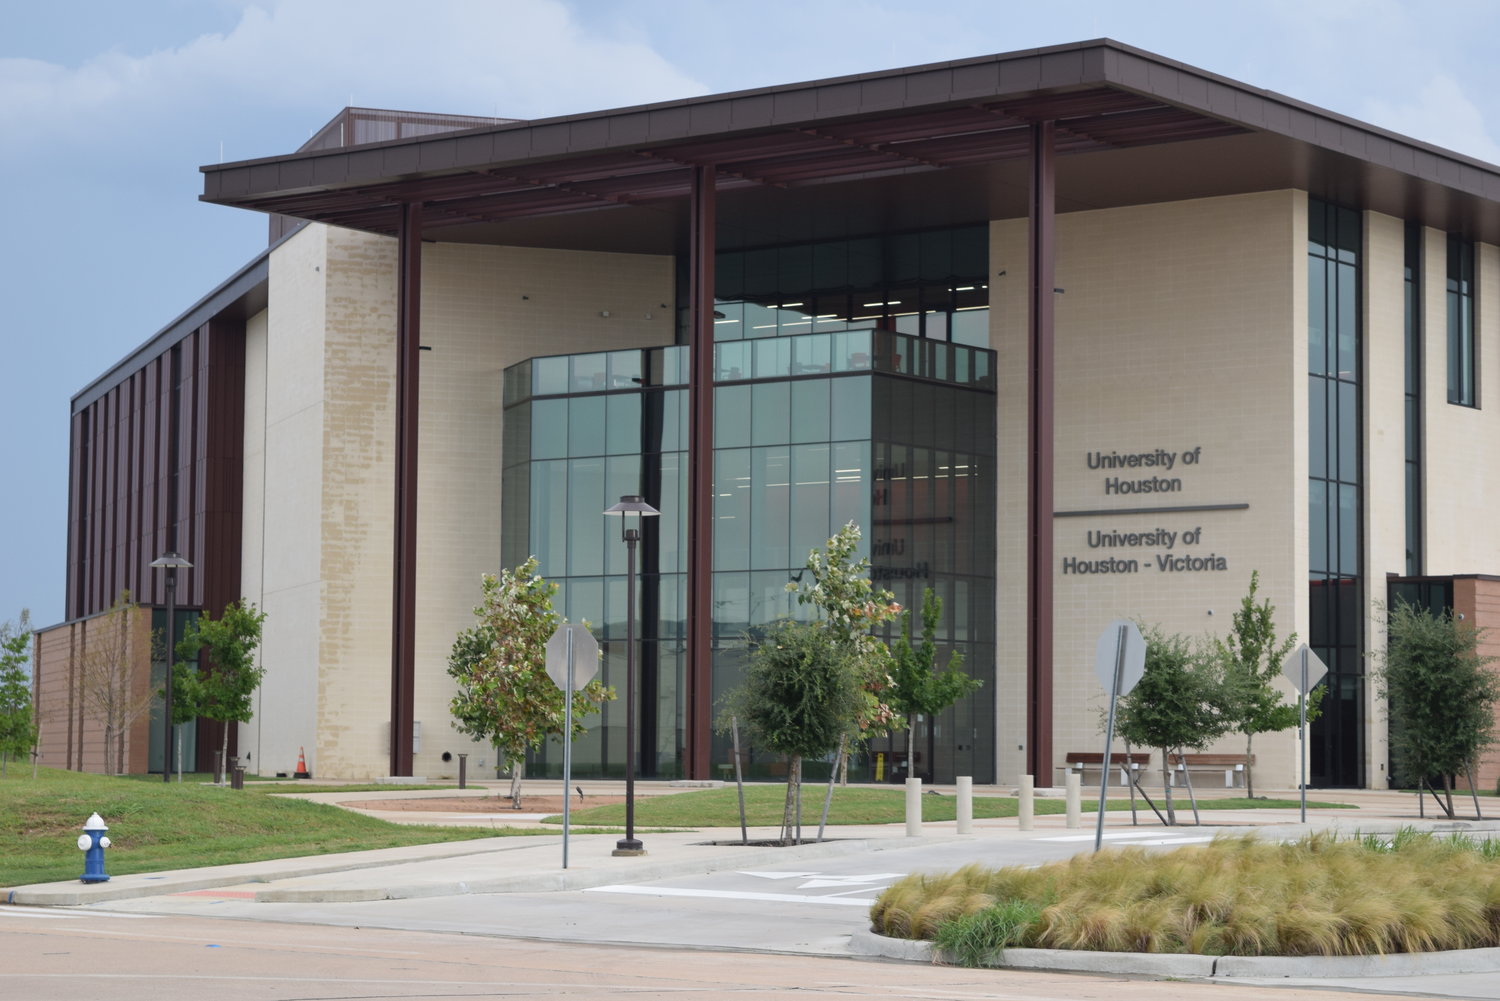 DeCuir works at the University of Houston-Victoria’s Katy campus located at 22400 Grand Circle Boulevard in Katy. The facility also holds the University of Houston’s Katy Campus and is within walking distance of Houston Community College’s upcoming Katy Campus.